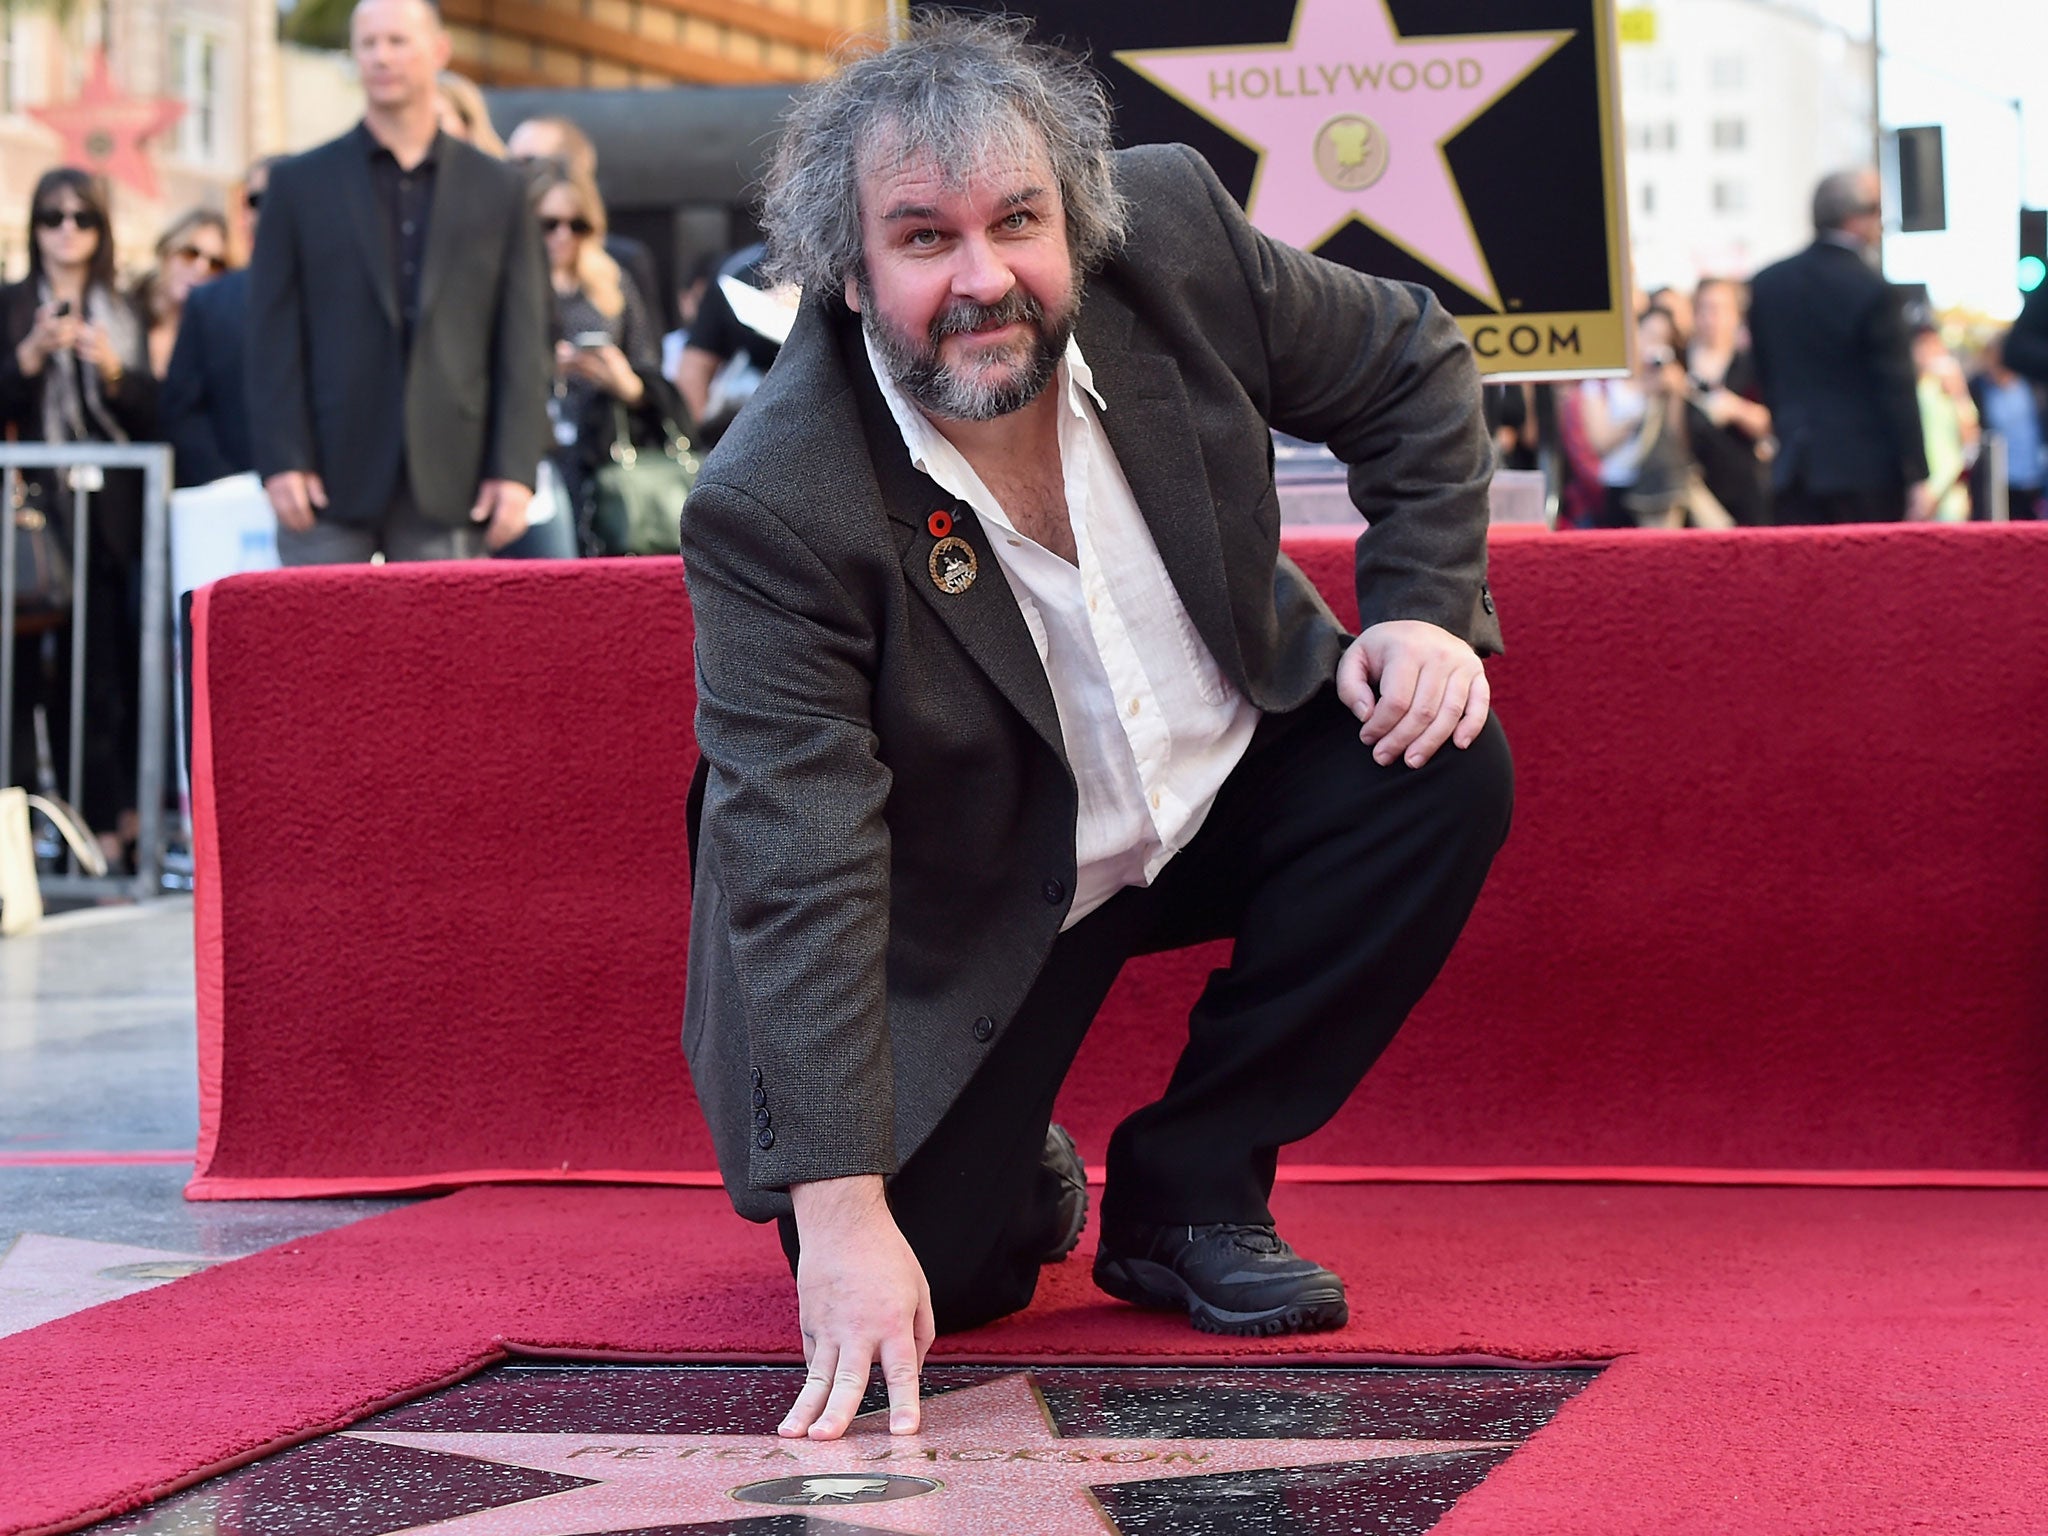 The Lord of the Rings and The Hobbit director Peter Jackson with his star on the Hollywood Walk of Fame